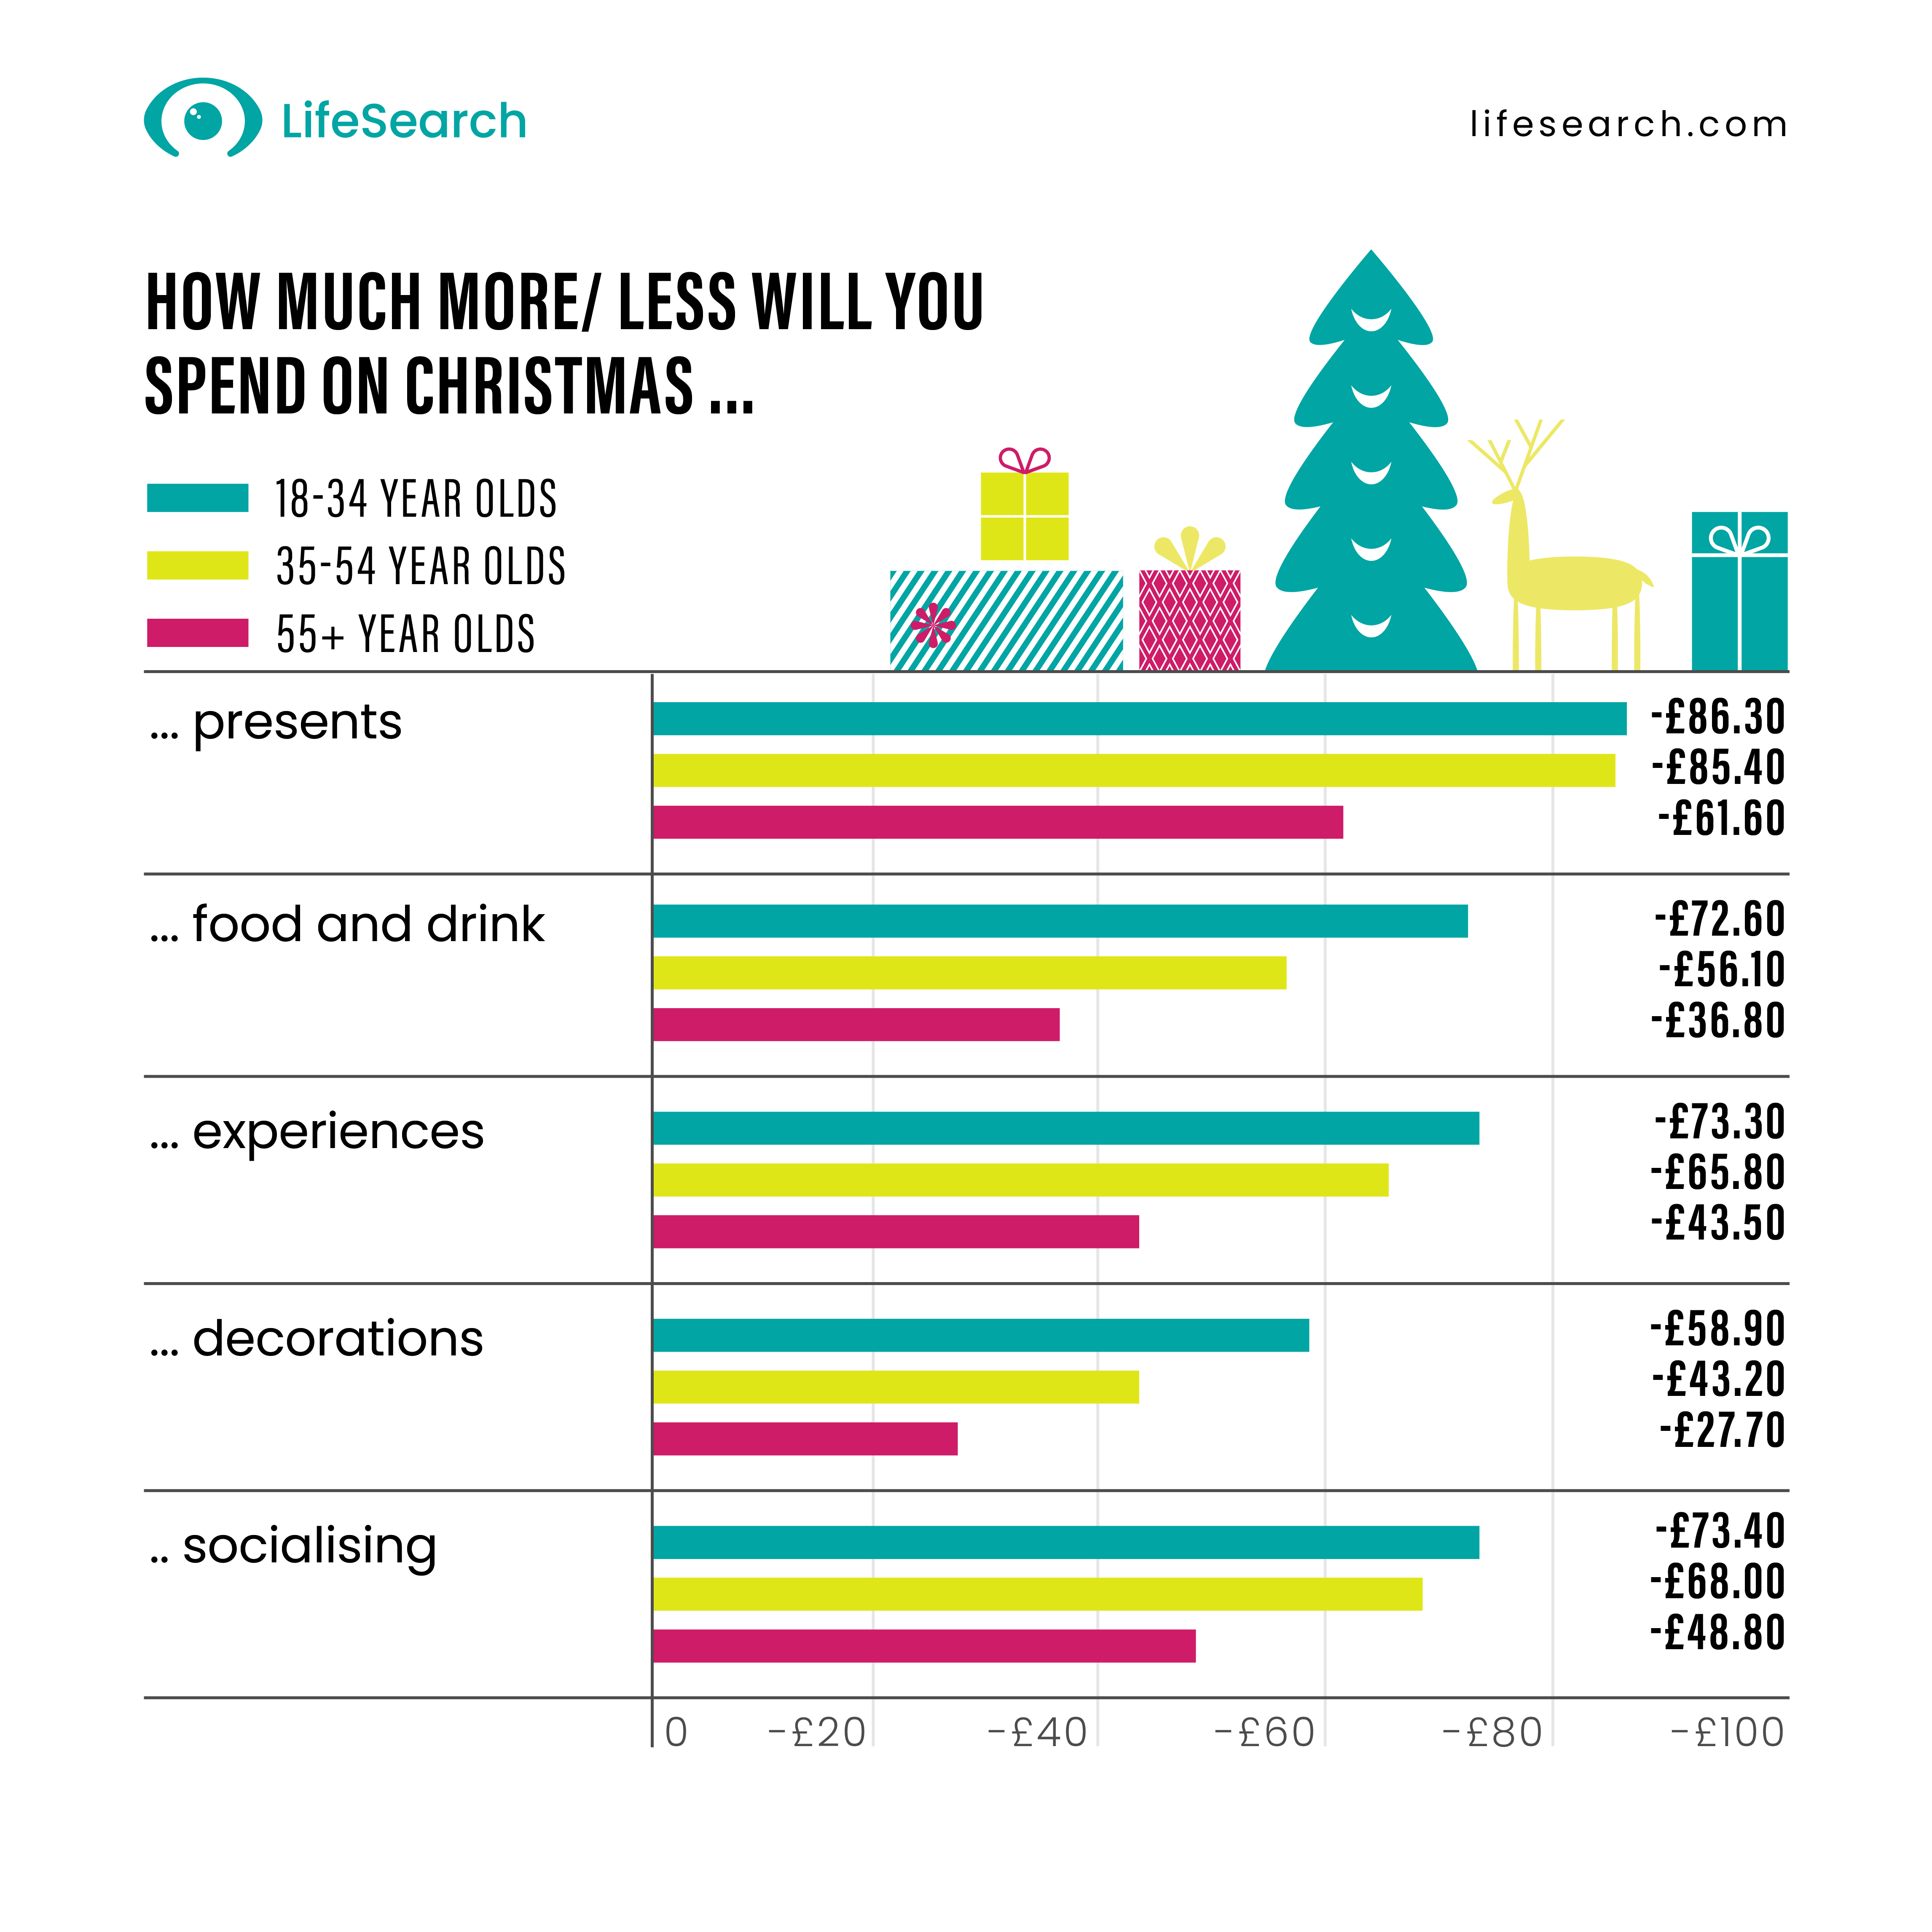 Table showing more or less people will be spending on Christmas